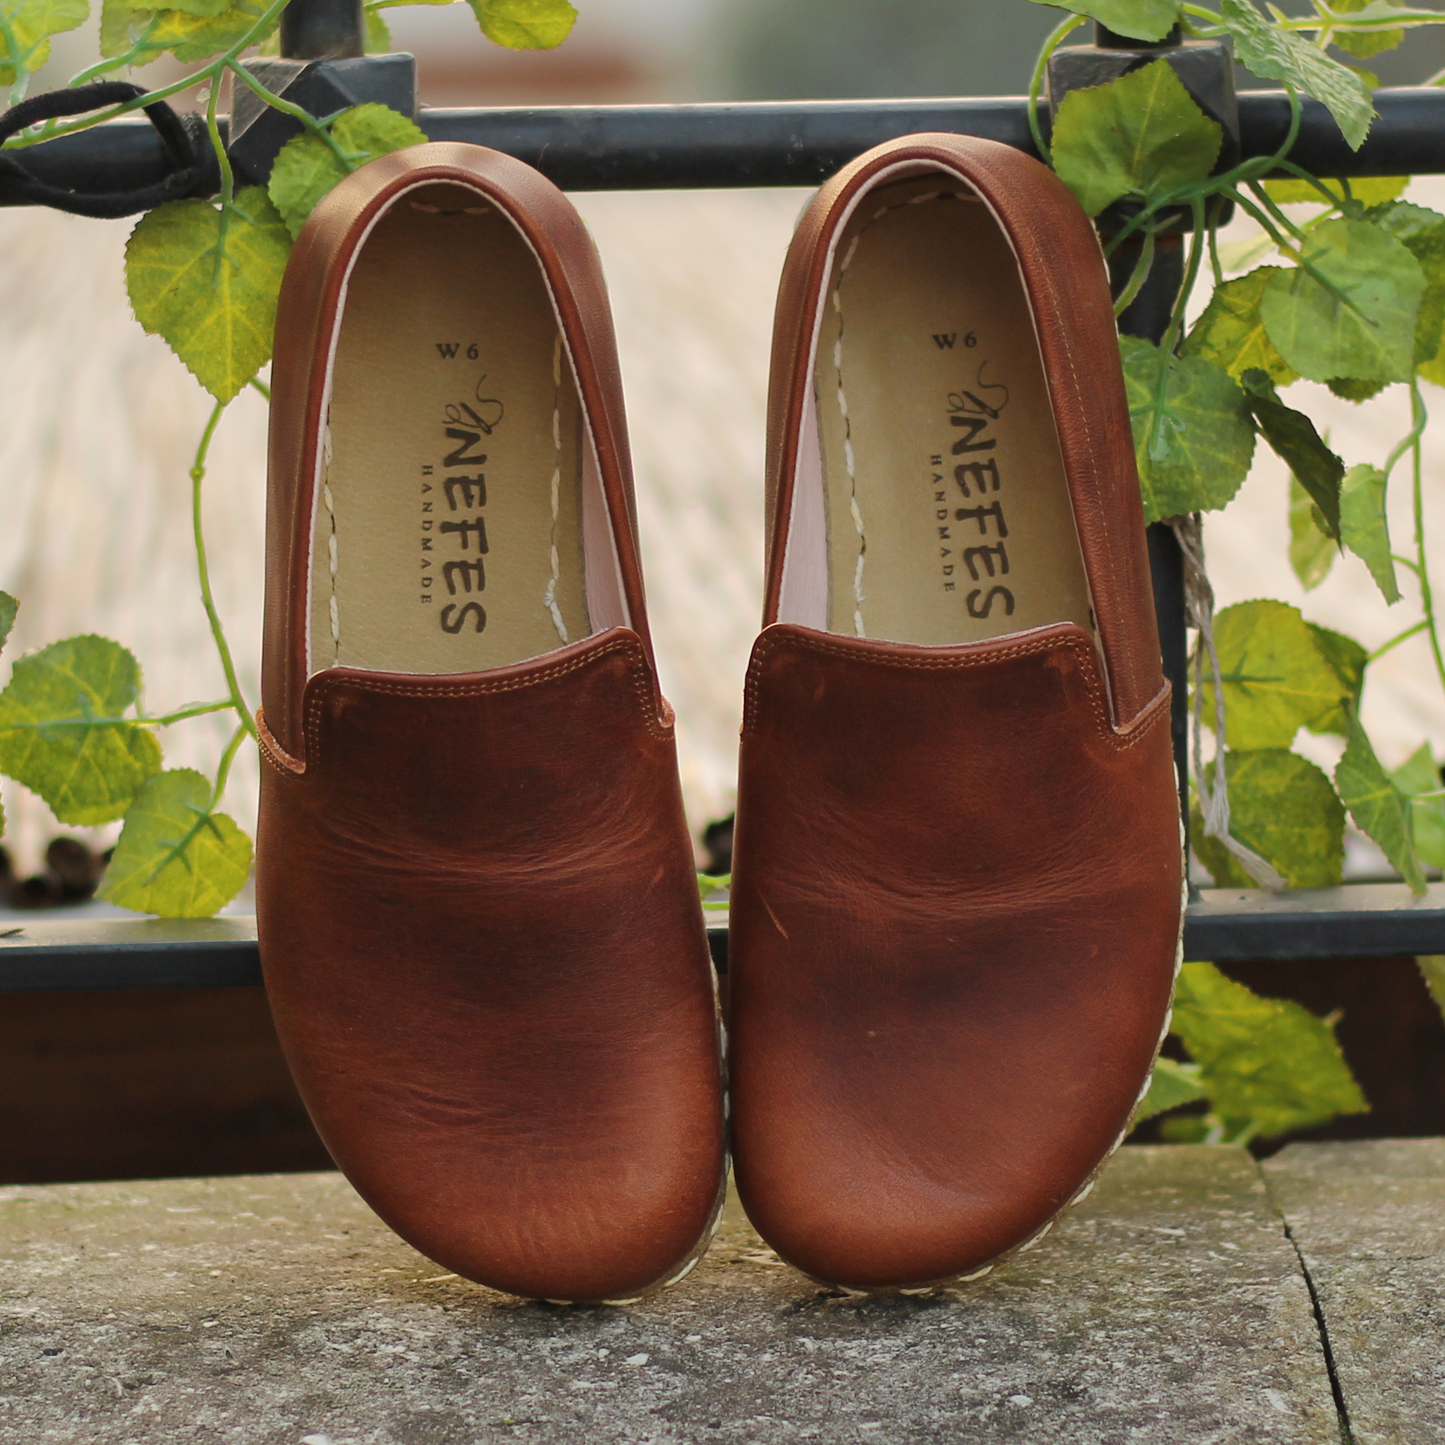 Modern Barefoot Shoes for Women: Crazy Brown Leather Elegance